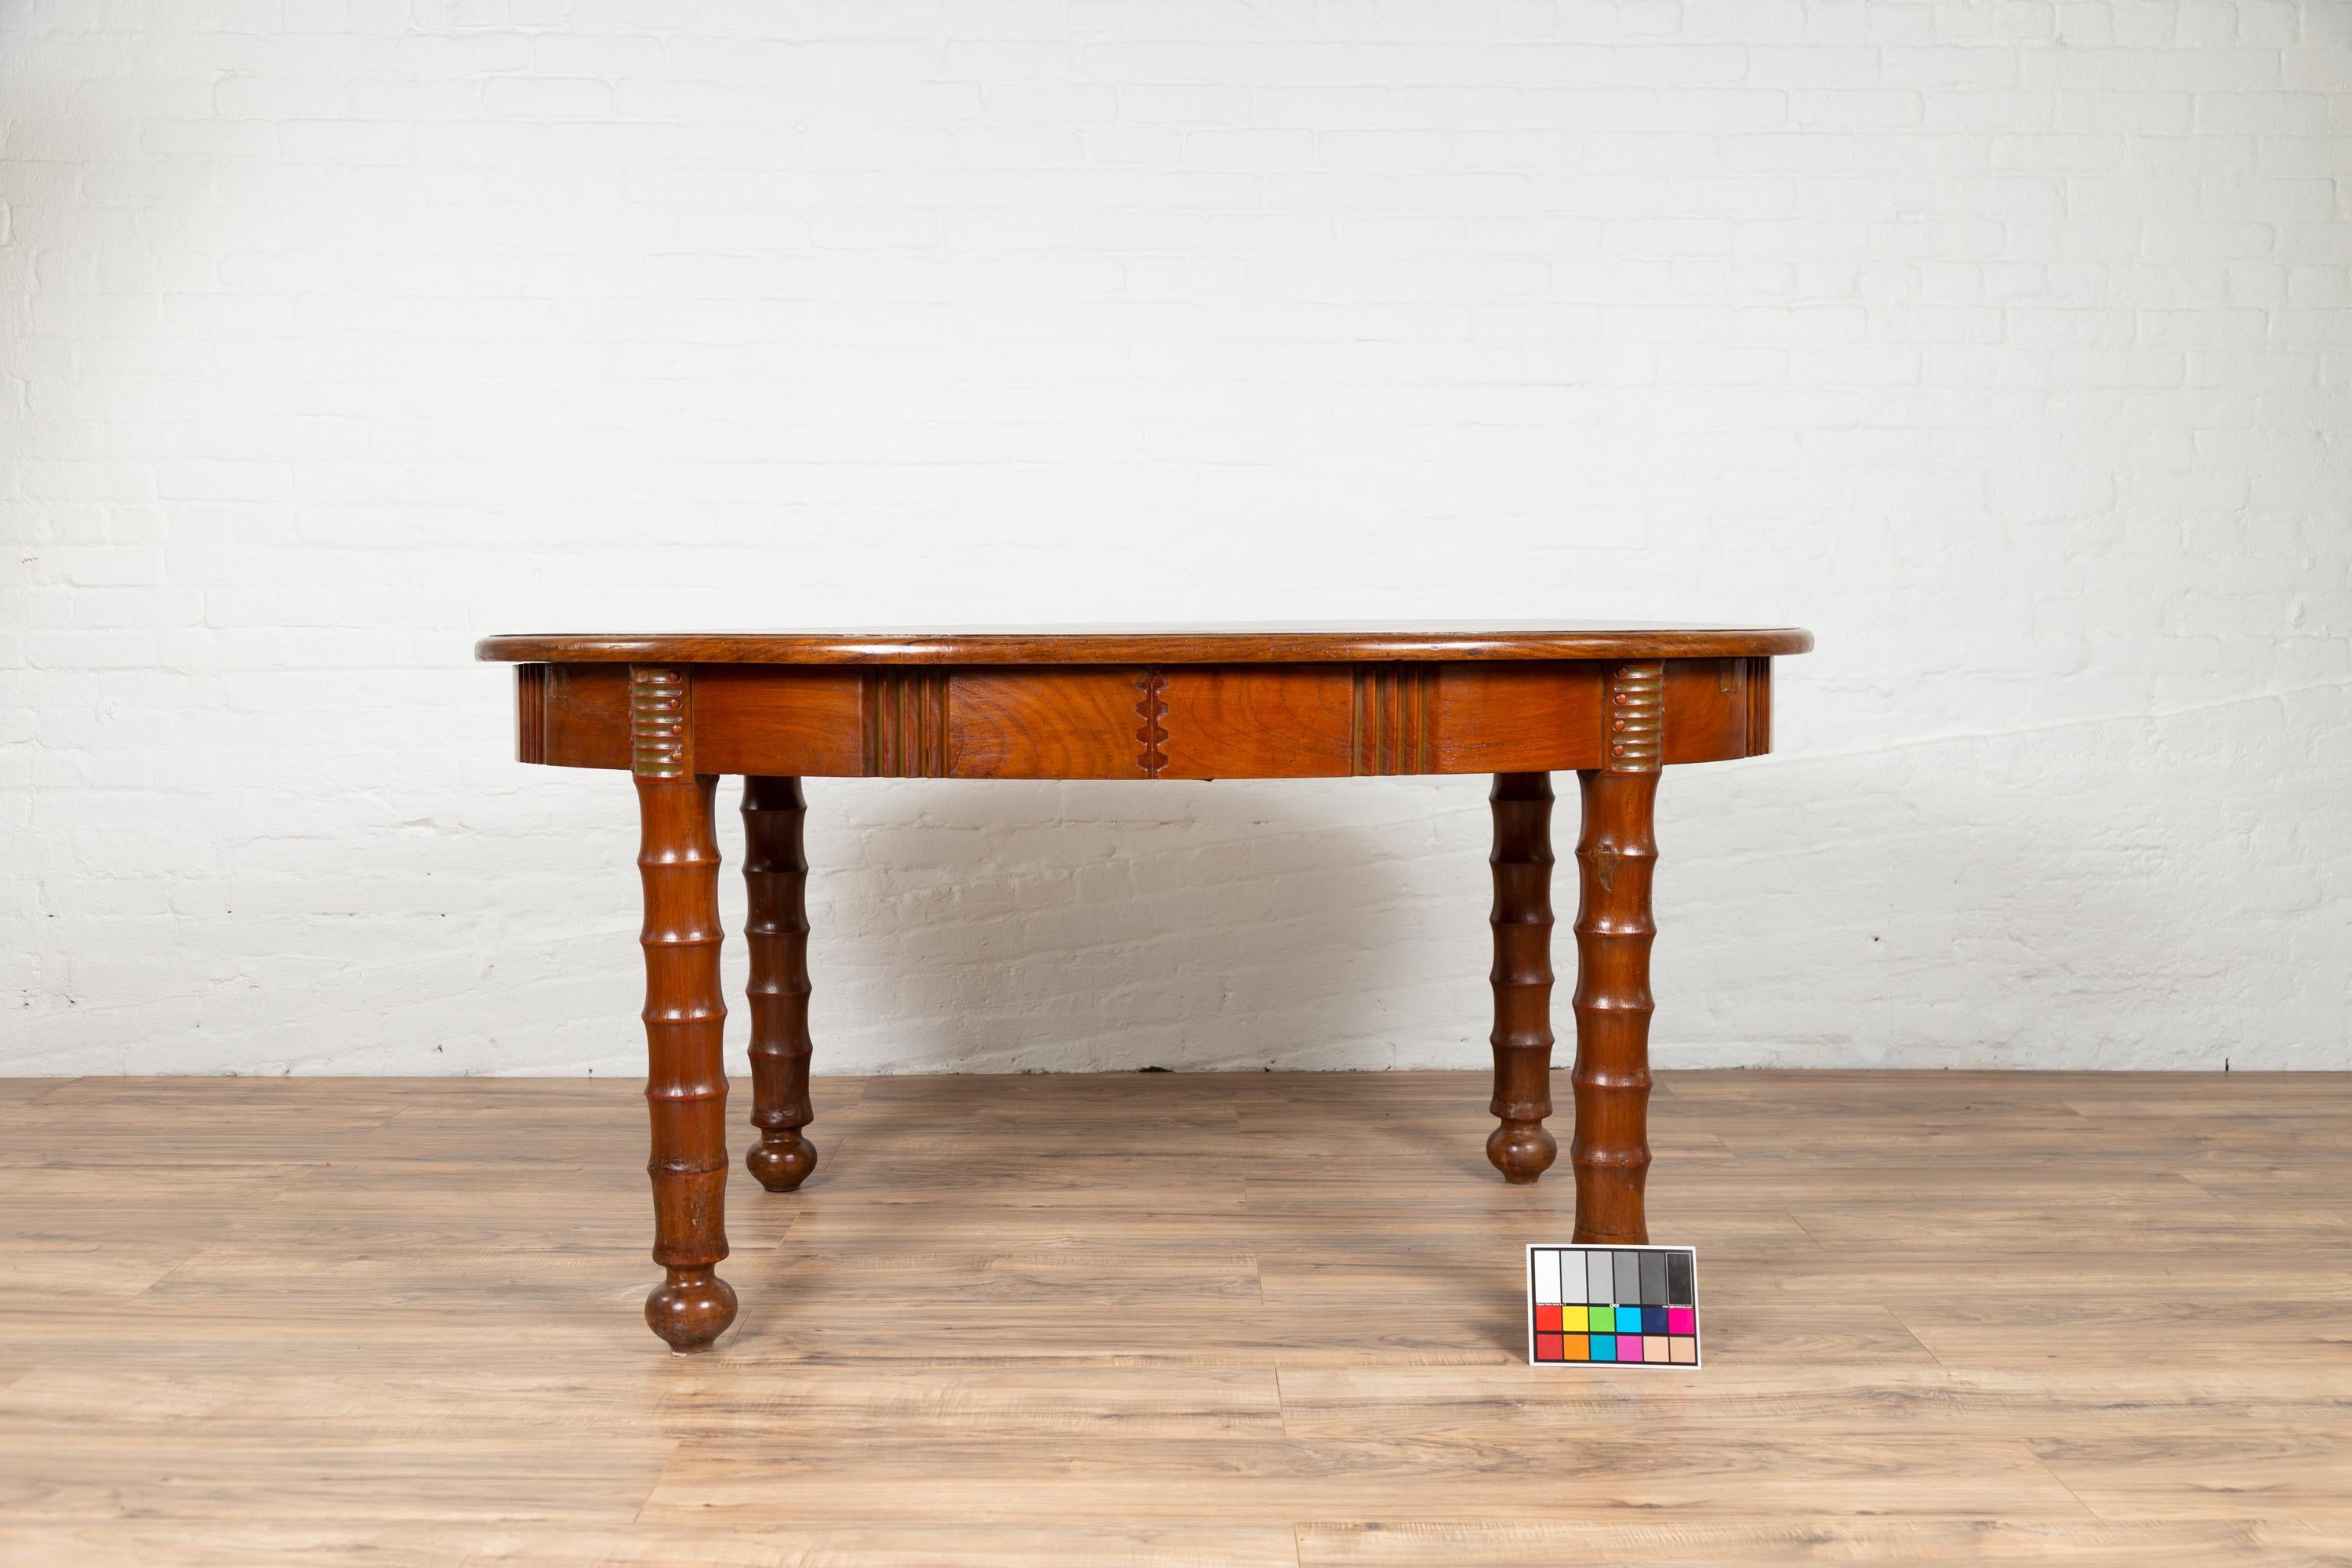 An antique Indonesian wooden oval-shaped dining room table from the early 20th century, with spindle-shaped legs. This elegant Indonesian wooden dining table features an oval top with rounded edges, sitting above an elegant apron accented with